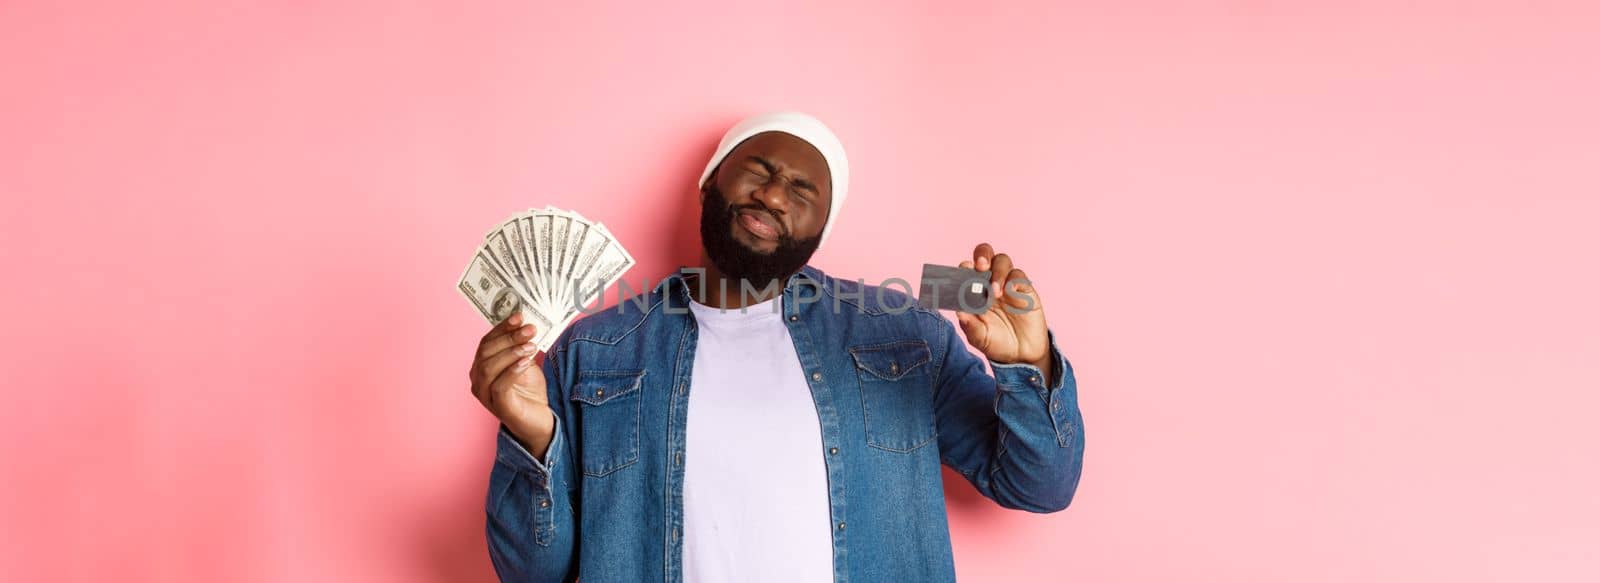 Shopping concept. Sad and whining Black guy showing credit card and dollars, grimacing reluctant, standing over pink background.